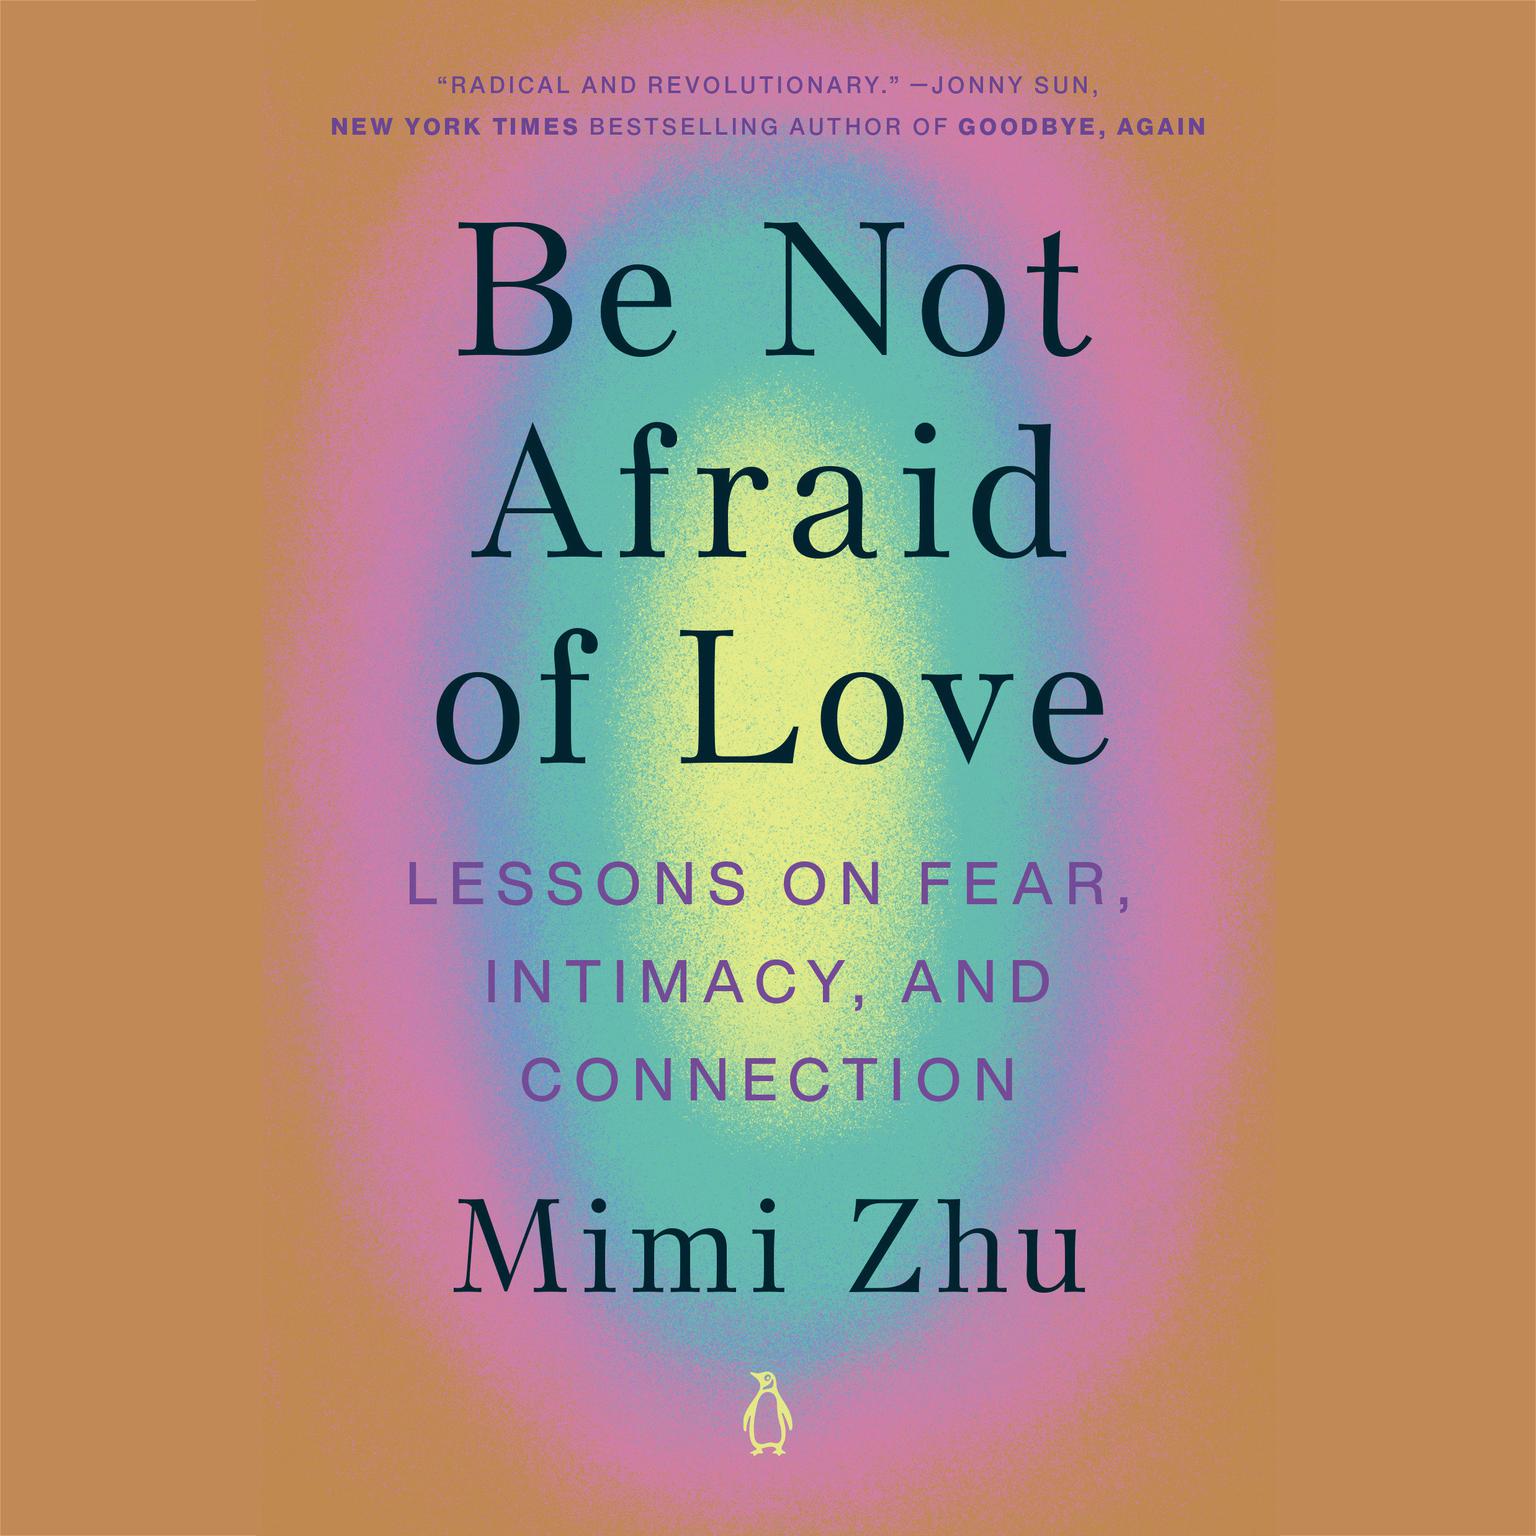 Be Not Afraid of Love: Lessons on Fear, Intimacy, and Connection Audiobook, by Mimi Zhu